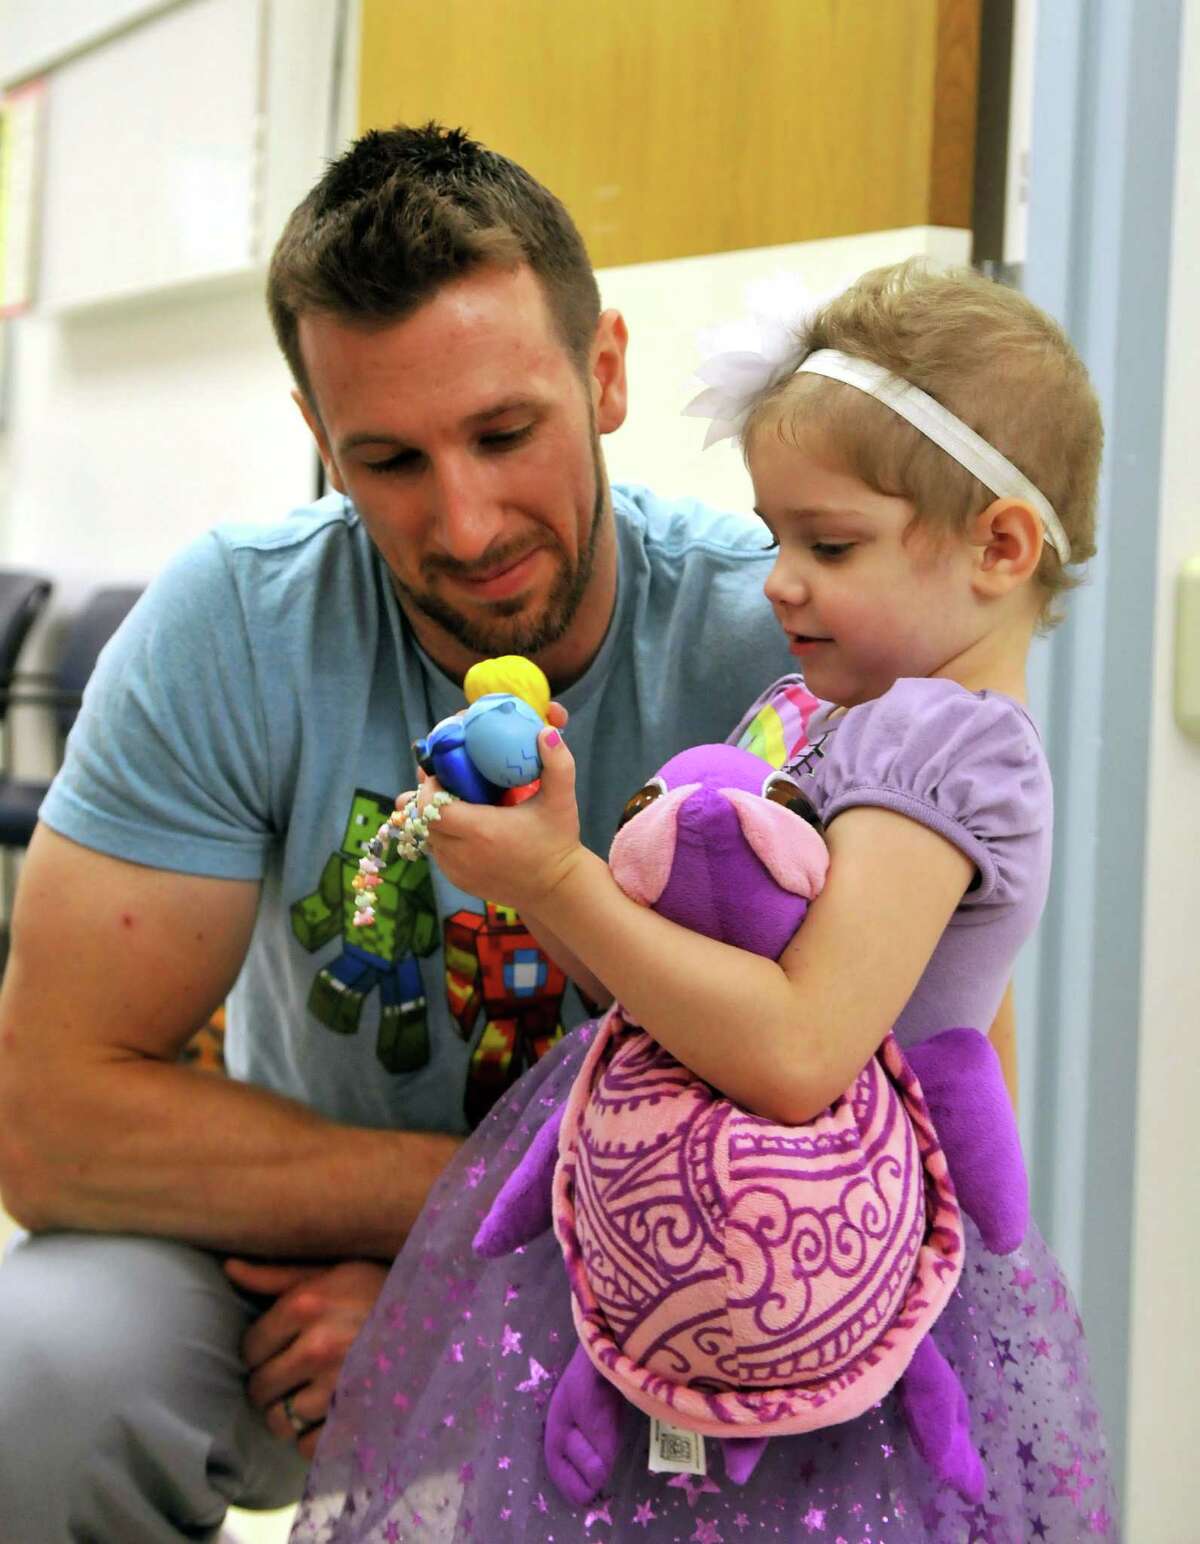 Abby Sayles hangs out with Nurse Matt Hickling on Friday, July 17, 2015, at Albany Medical Center in Albany, N.Y. Abby had a wedding ceremony with her favorite nurse, Matt Hickling, yesterday at the Melodies Center for Childhood Cancers at AMC. (Phoebe Sheehan/Special to The Times Union)